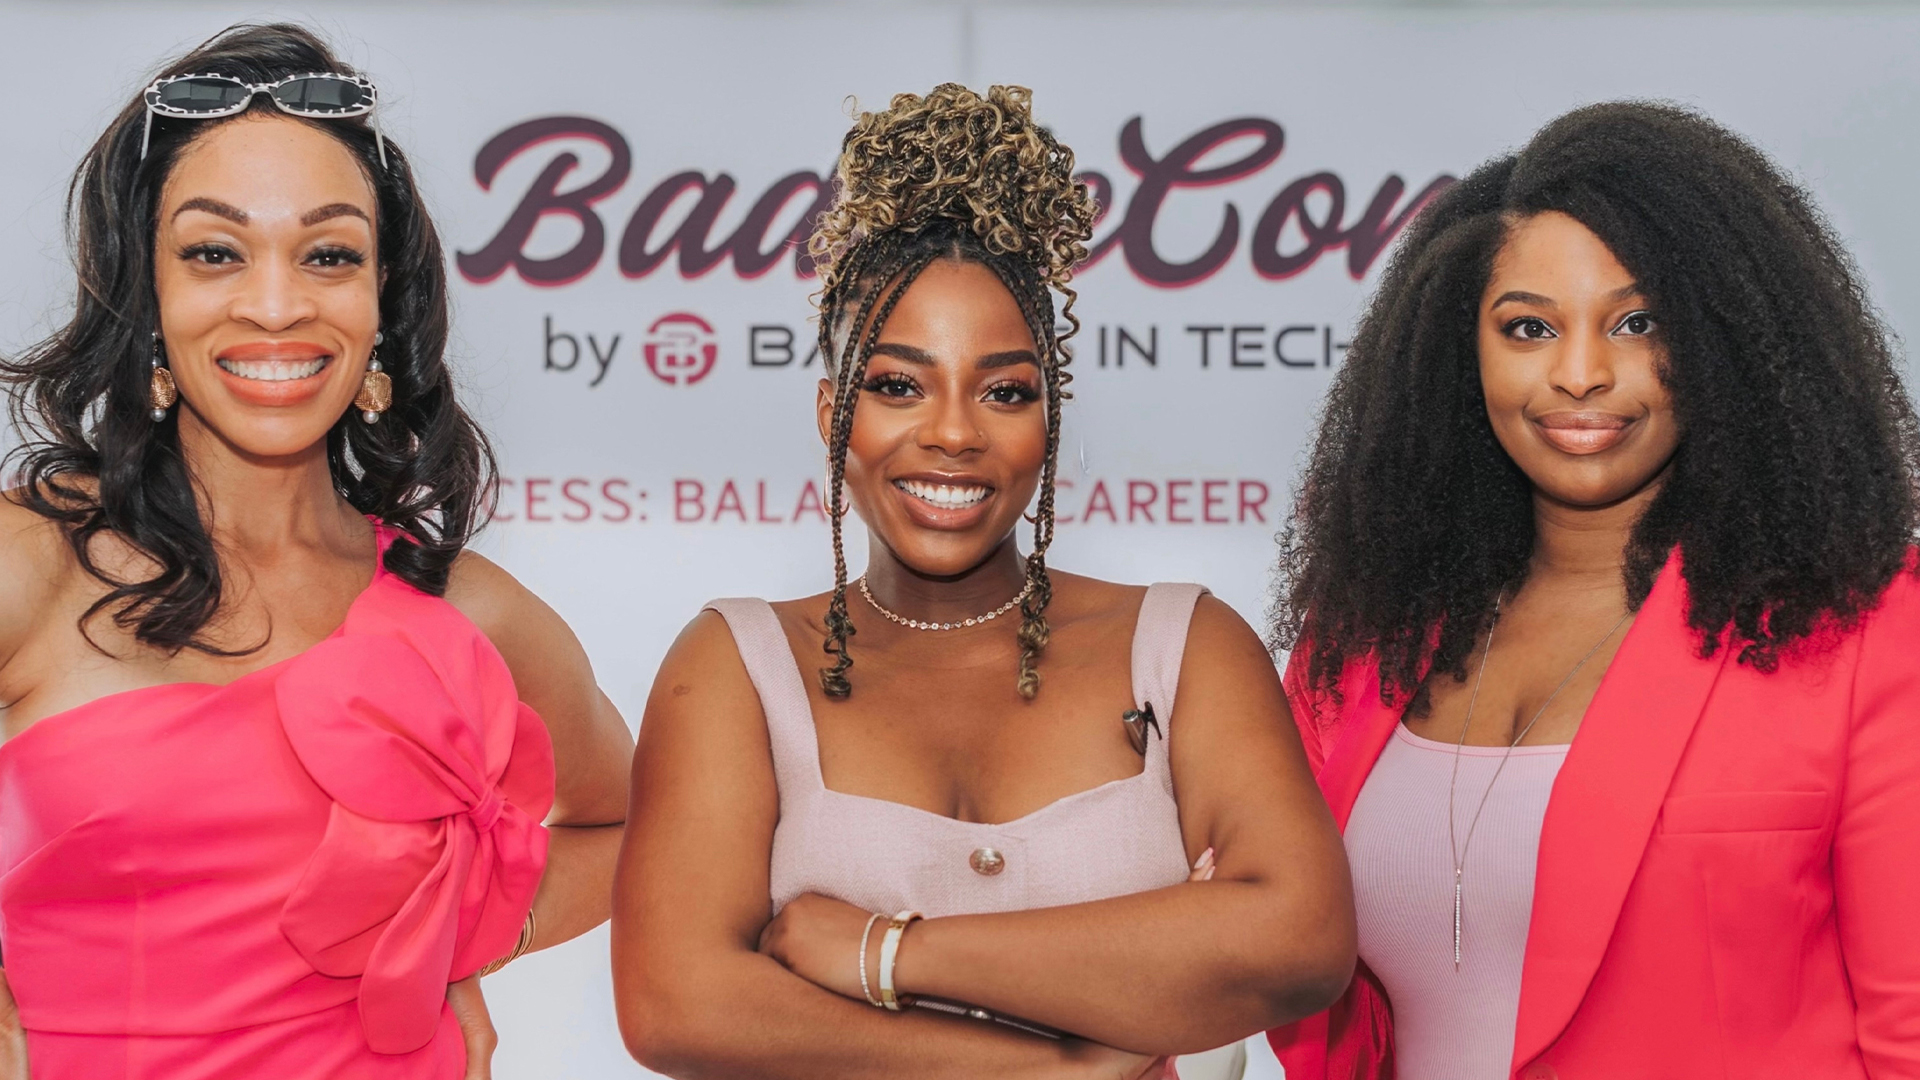 Meet The 'Baddies In Tech' Creating A Roadmap To Success For Black Women In The Industry